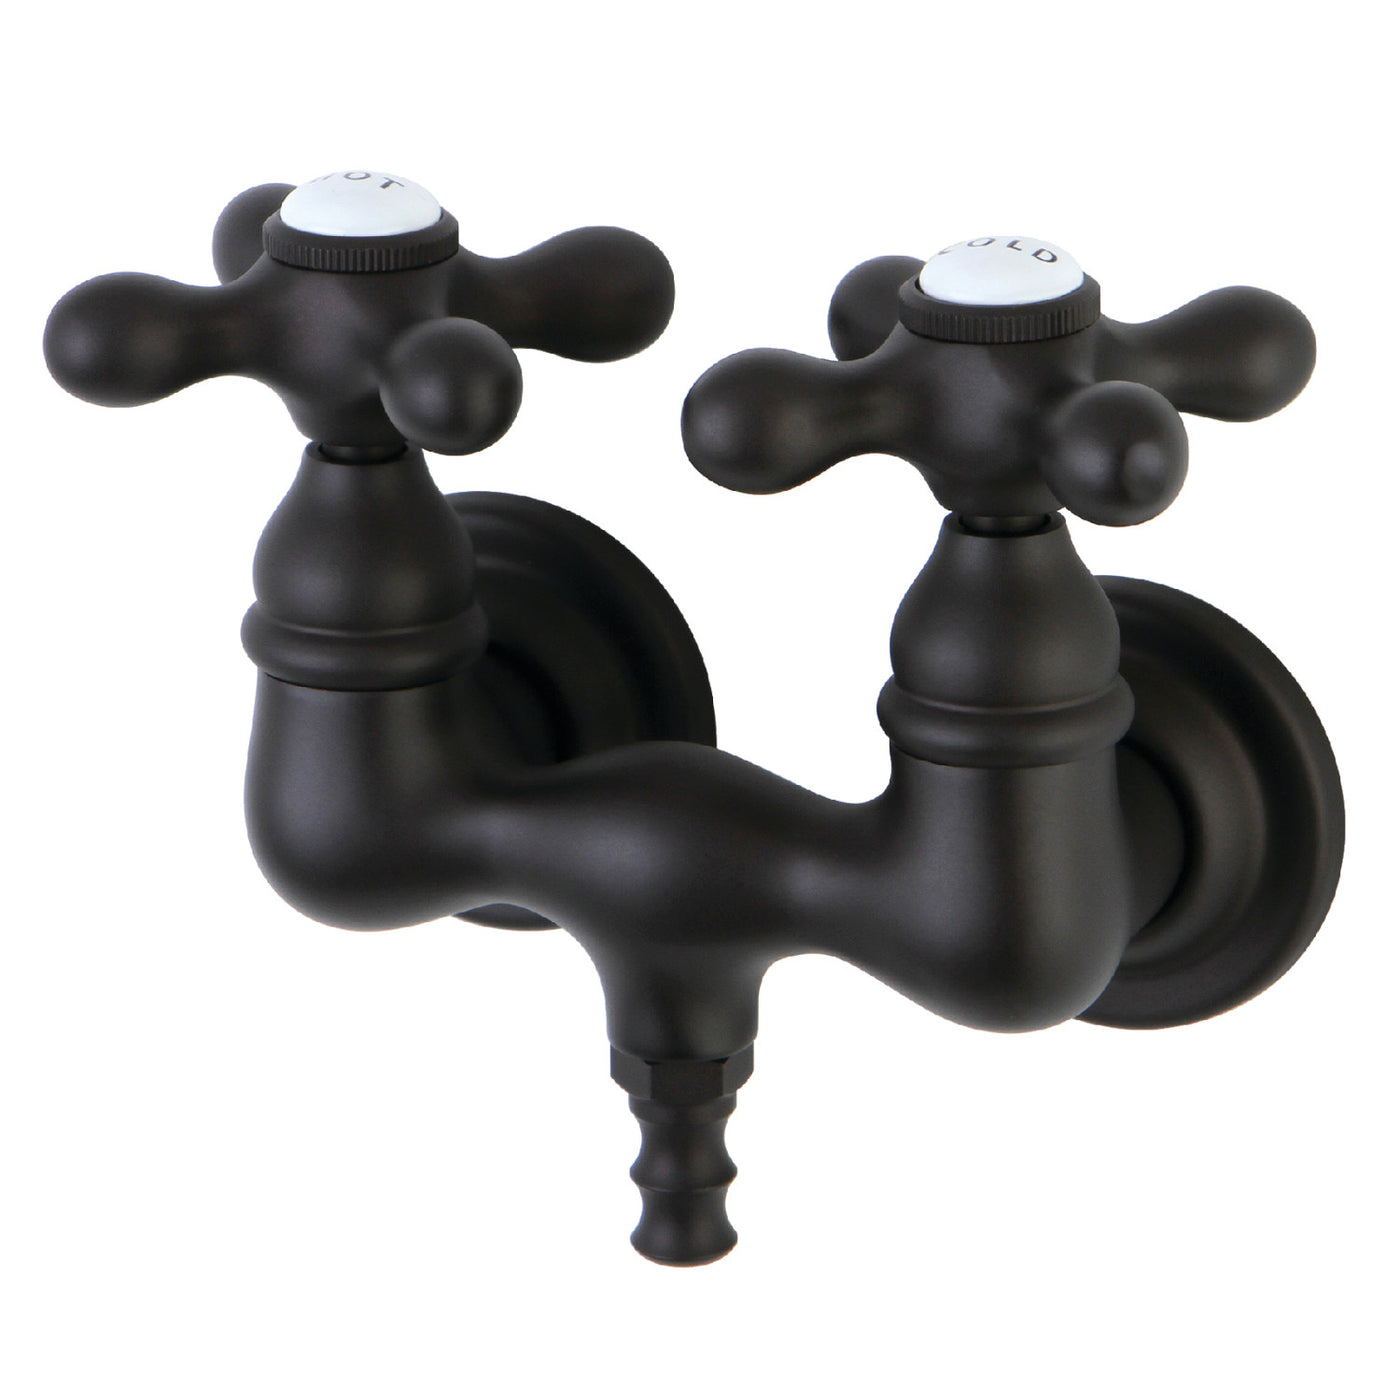 Elements of Design DT0315AX 3-3/8-Inch Wall Mount Tub Faucet, Oil Rubbed Bronze